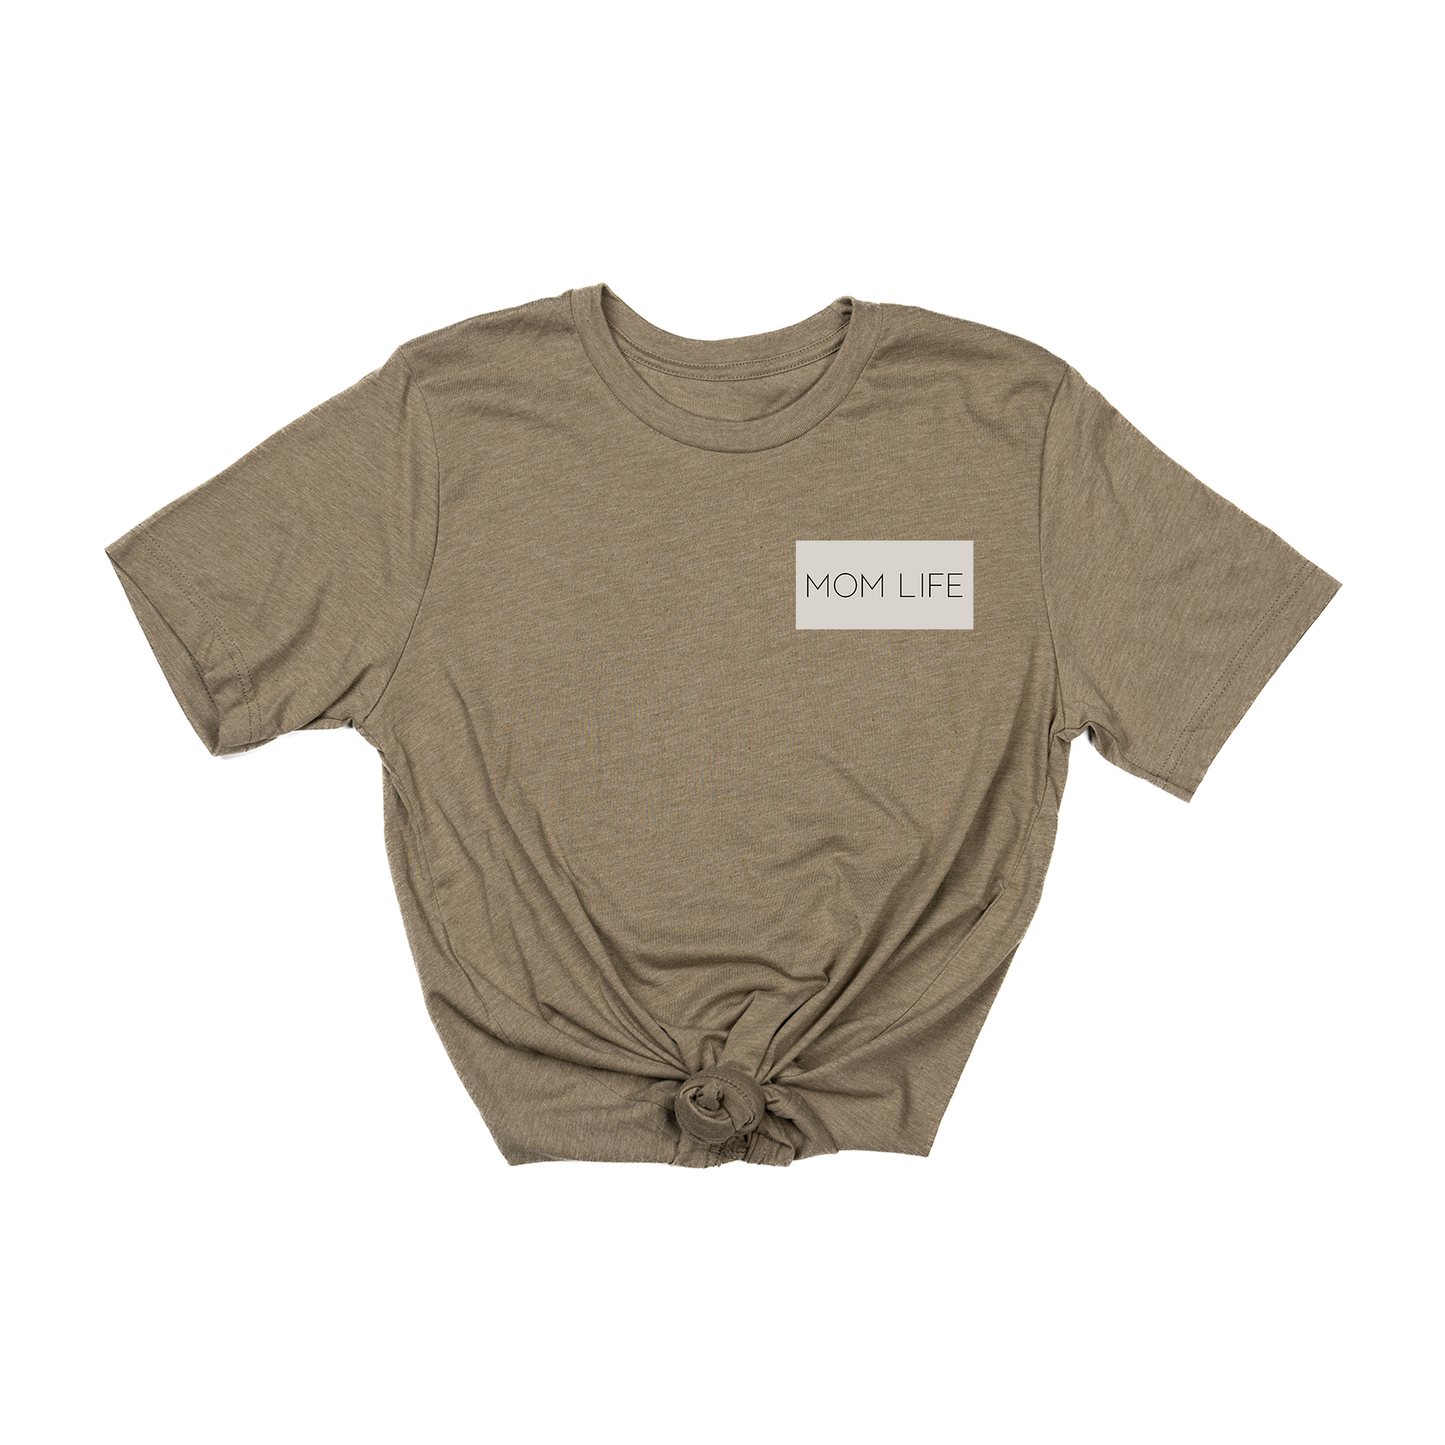 Mom Life (Boxed Collection, Pocket, Stone Box/Black Text) - Tee (Olive)